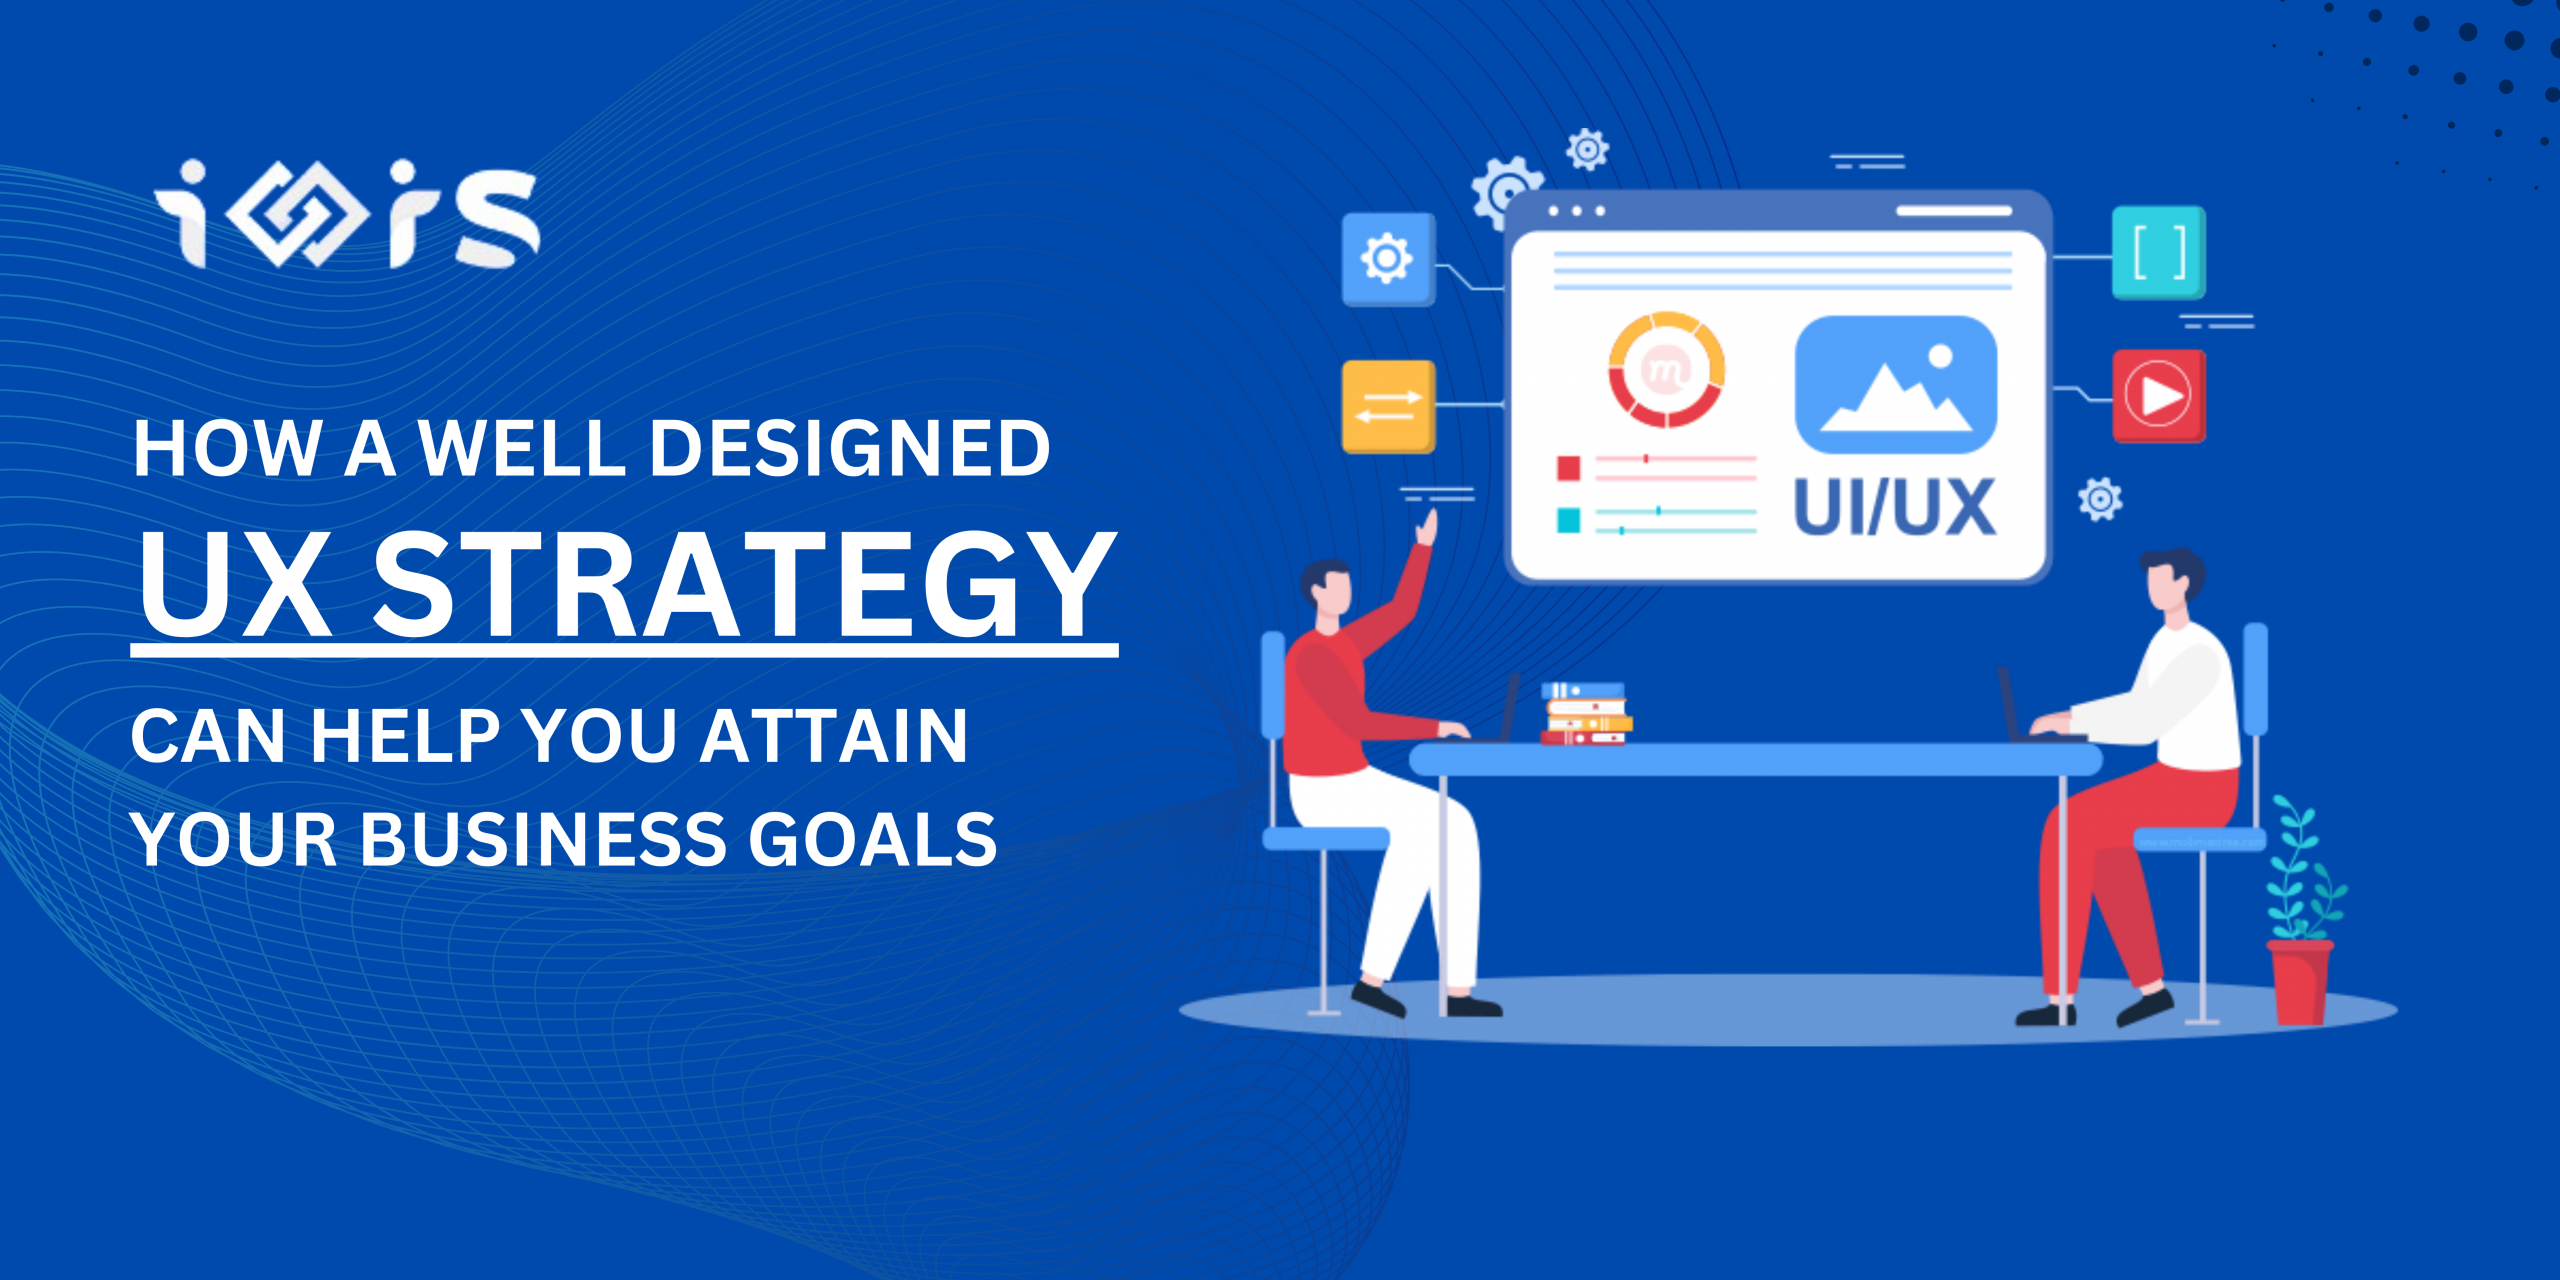 UX strategy can help you attain your business goals